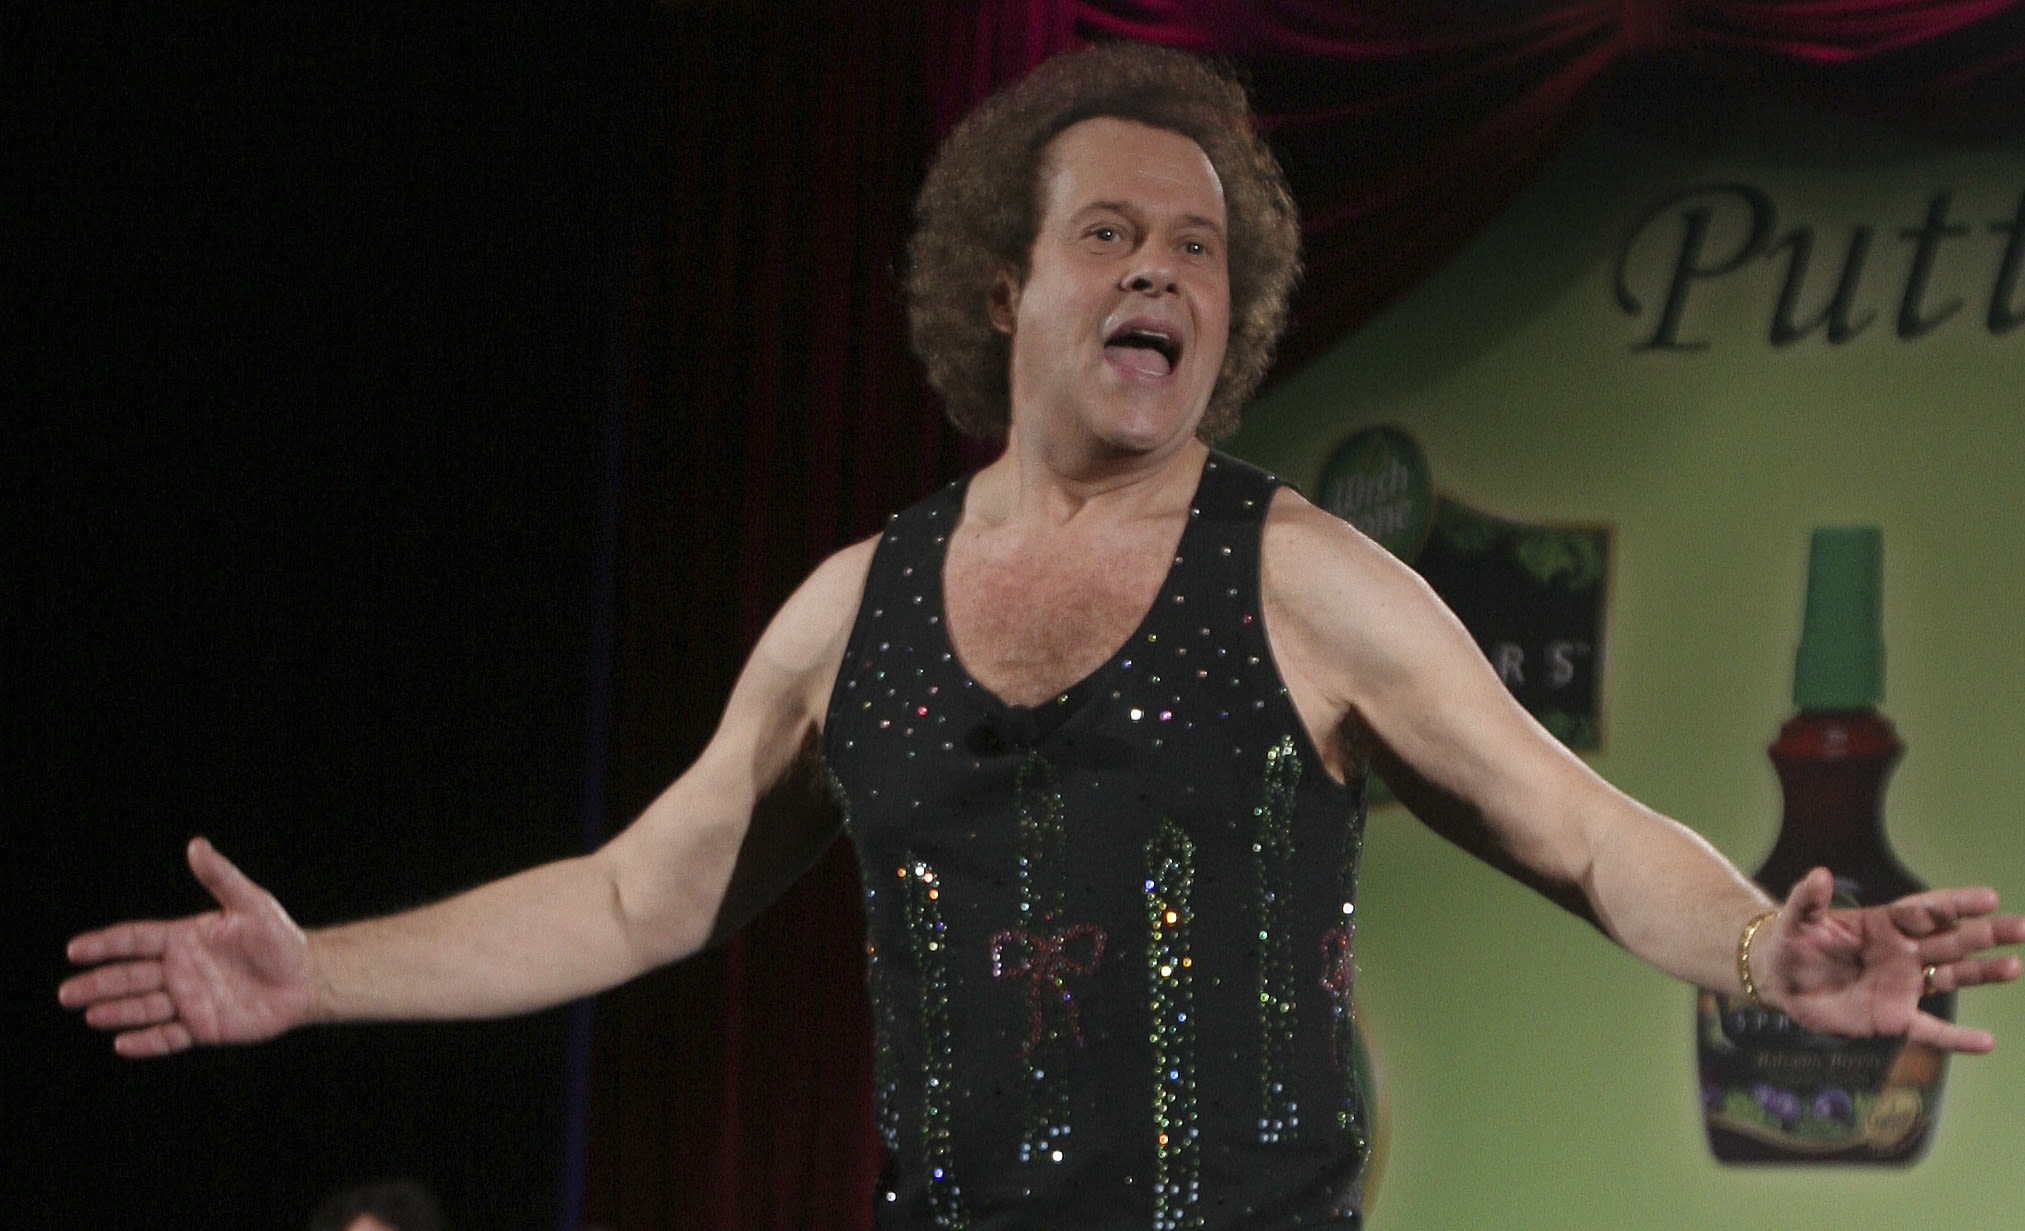 Richard Simmons, a fitness guru who mixed laughs and sweat, dies at 76